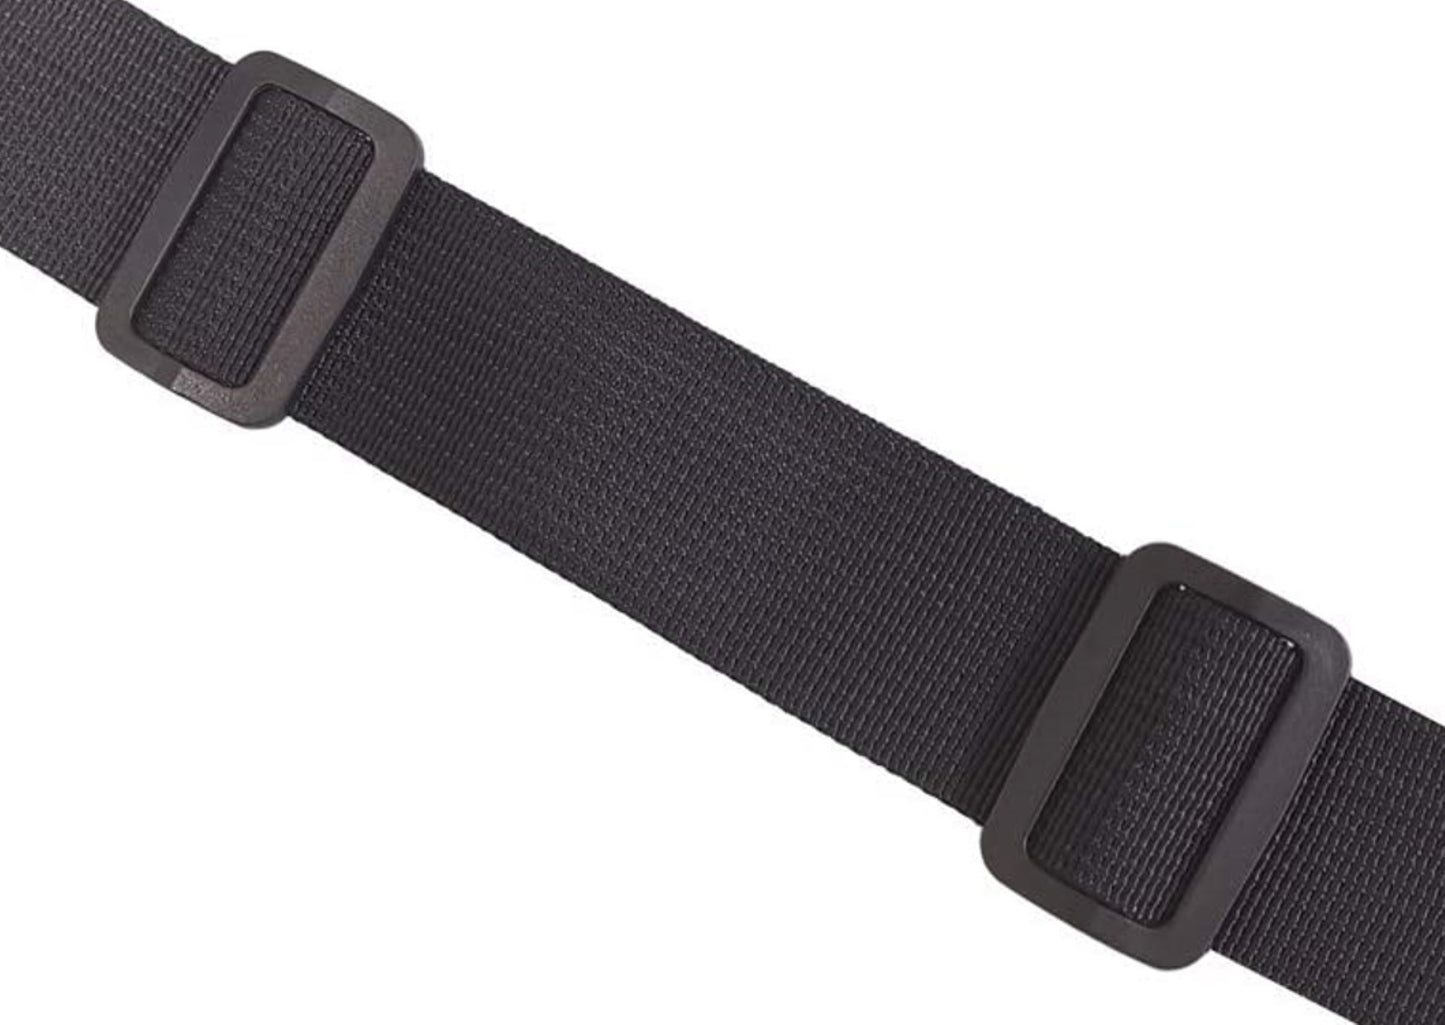 1.5 in/8mm Black Plastic Tri-Glide Slides Smooth Strapping for Belts, Bags & Buckles